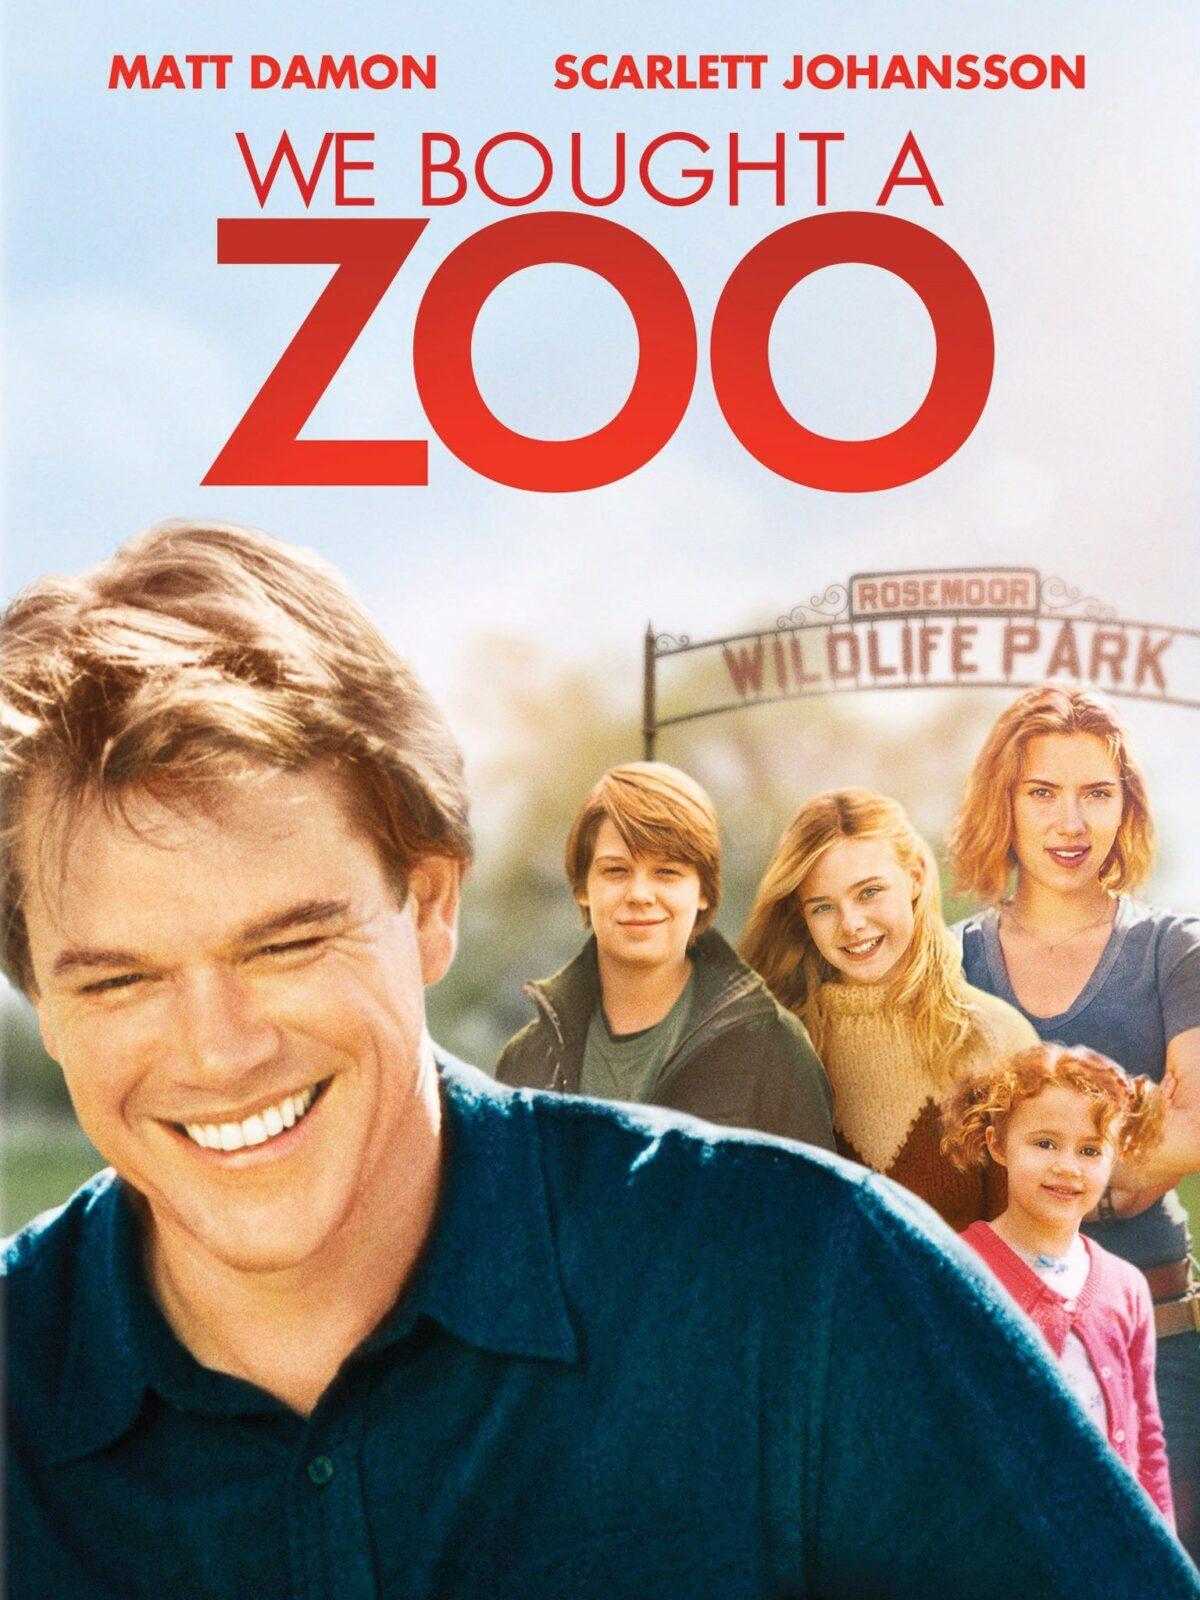 Movie poster for “We Bought a Zoo." (Twentieth Century Fox Film Corporation)